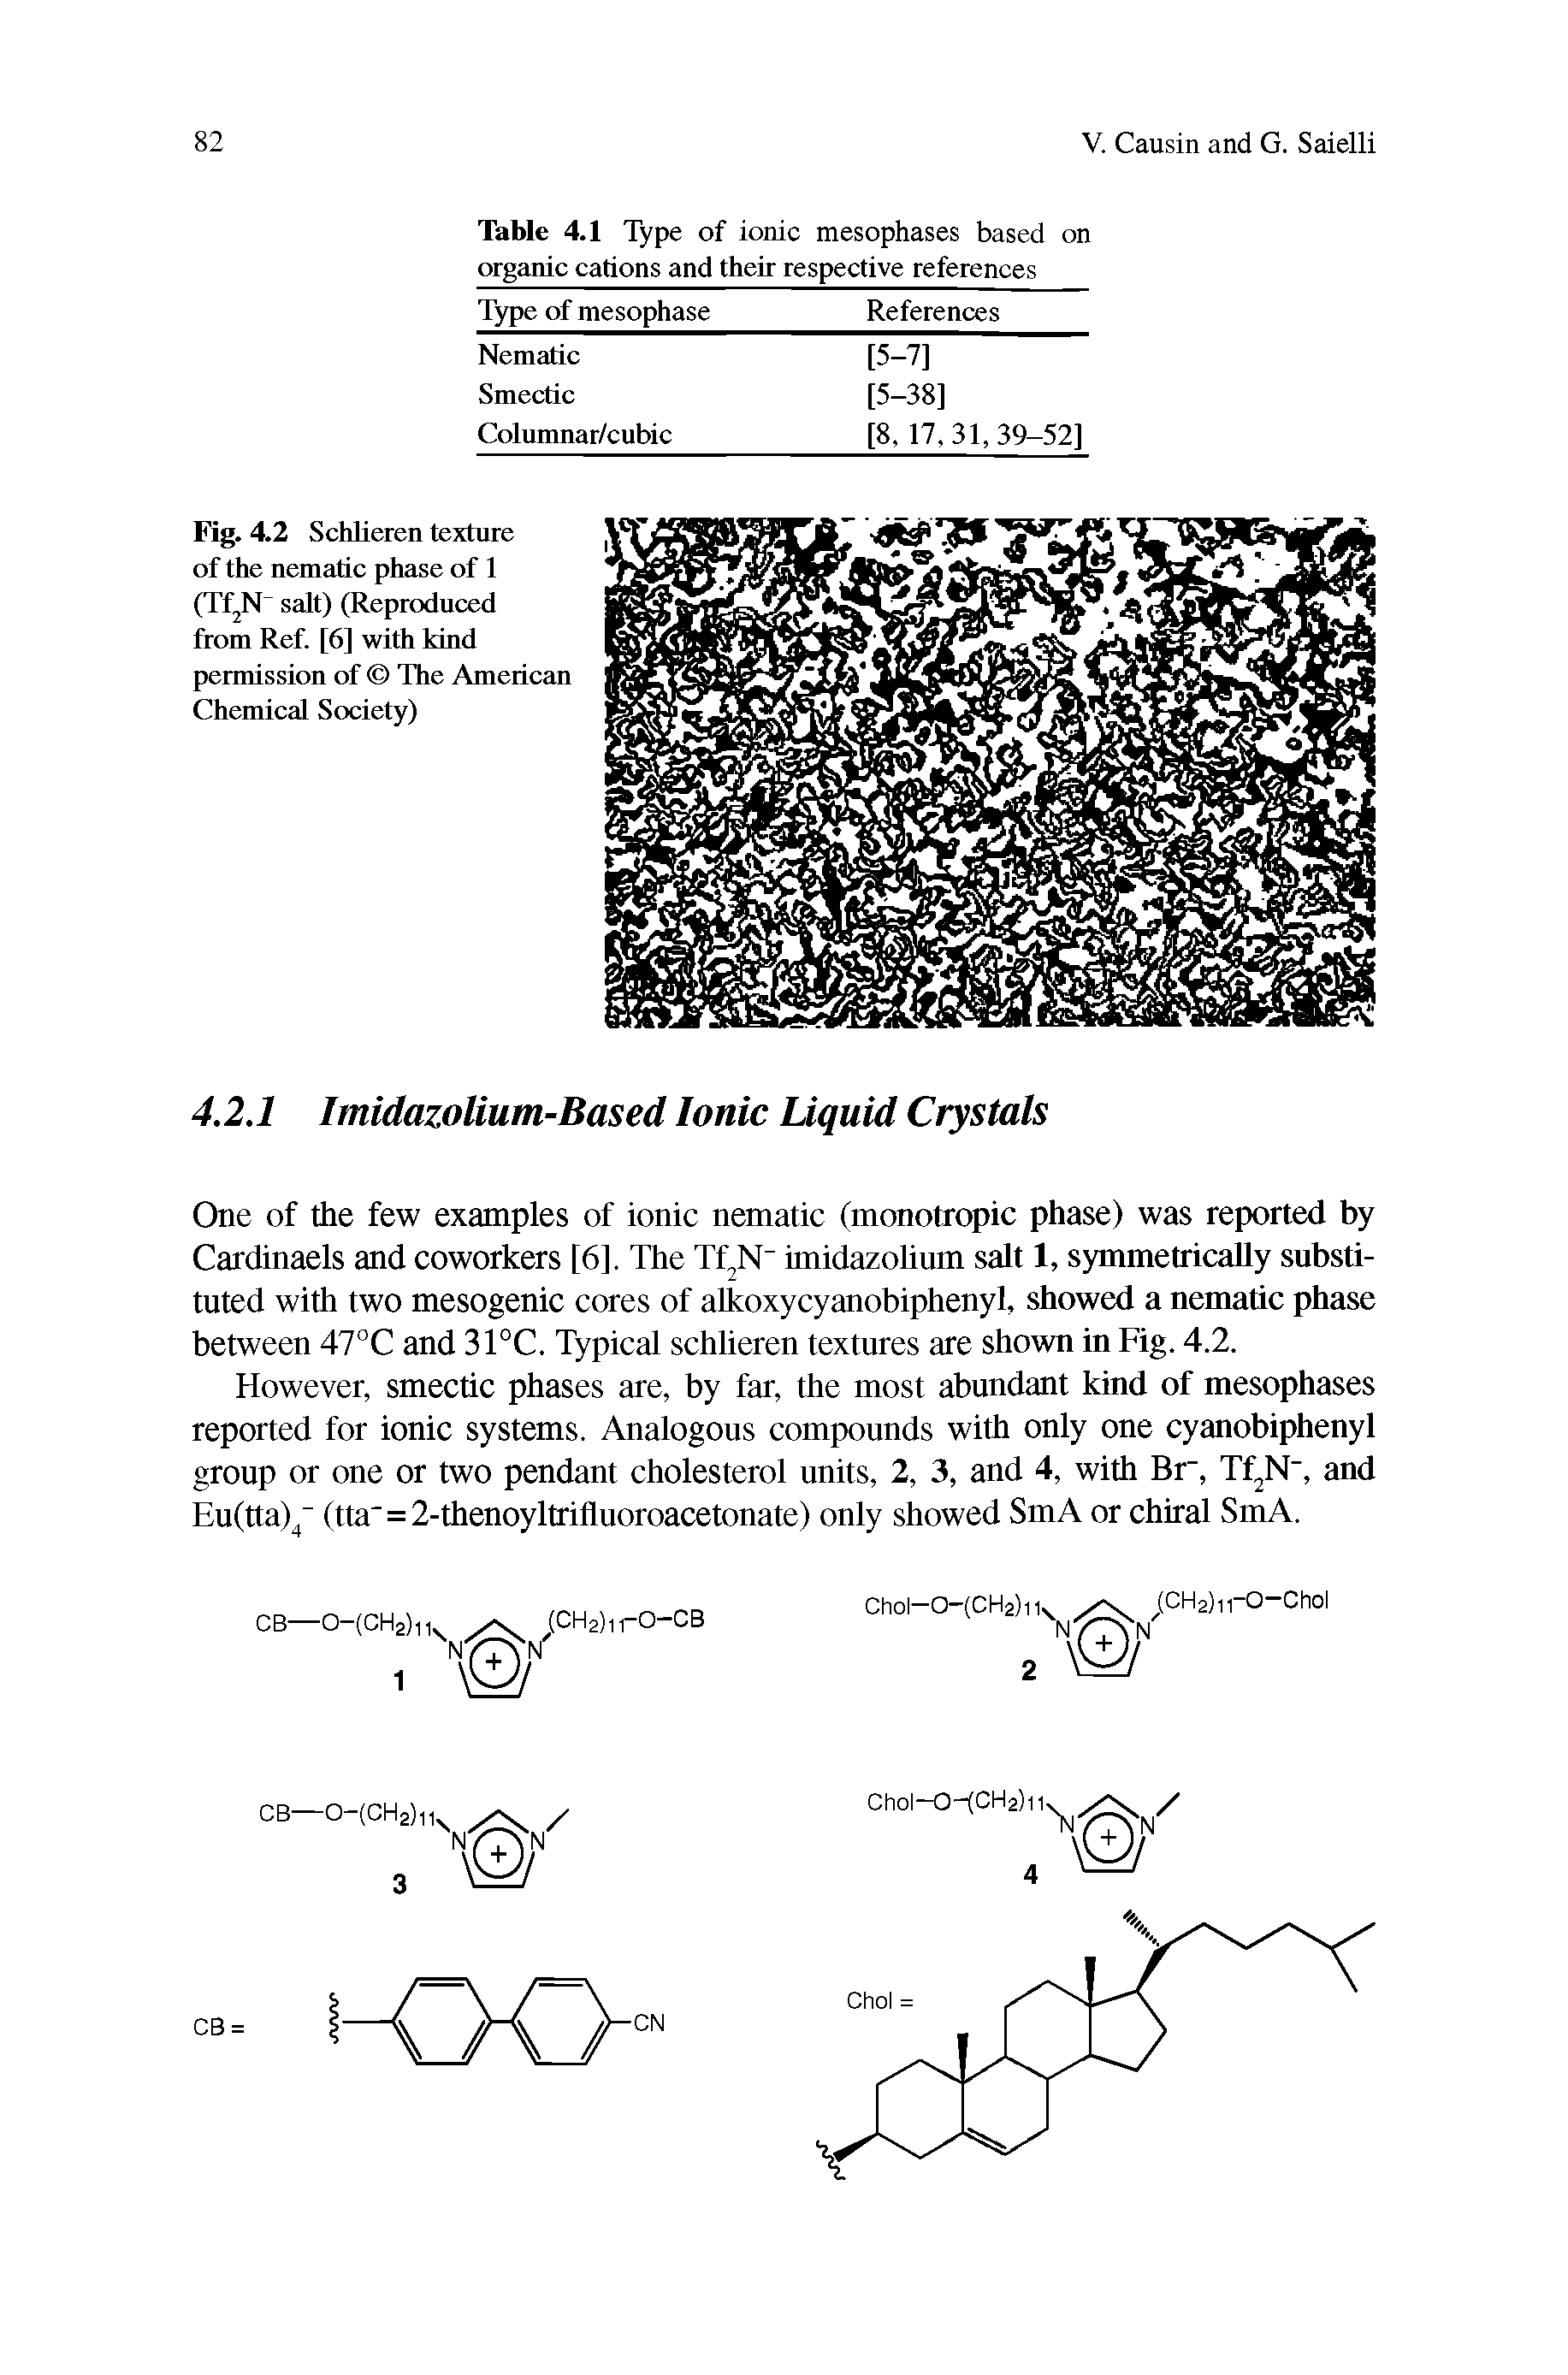 Fig. 4.2 Schlieren texture of the nematic phase of 1 (TfjN" salt) (Reproduced from Ref. [6] with kind permission of The American Chemical Society)...